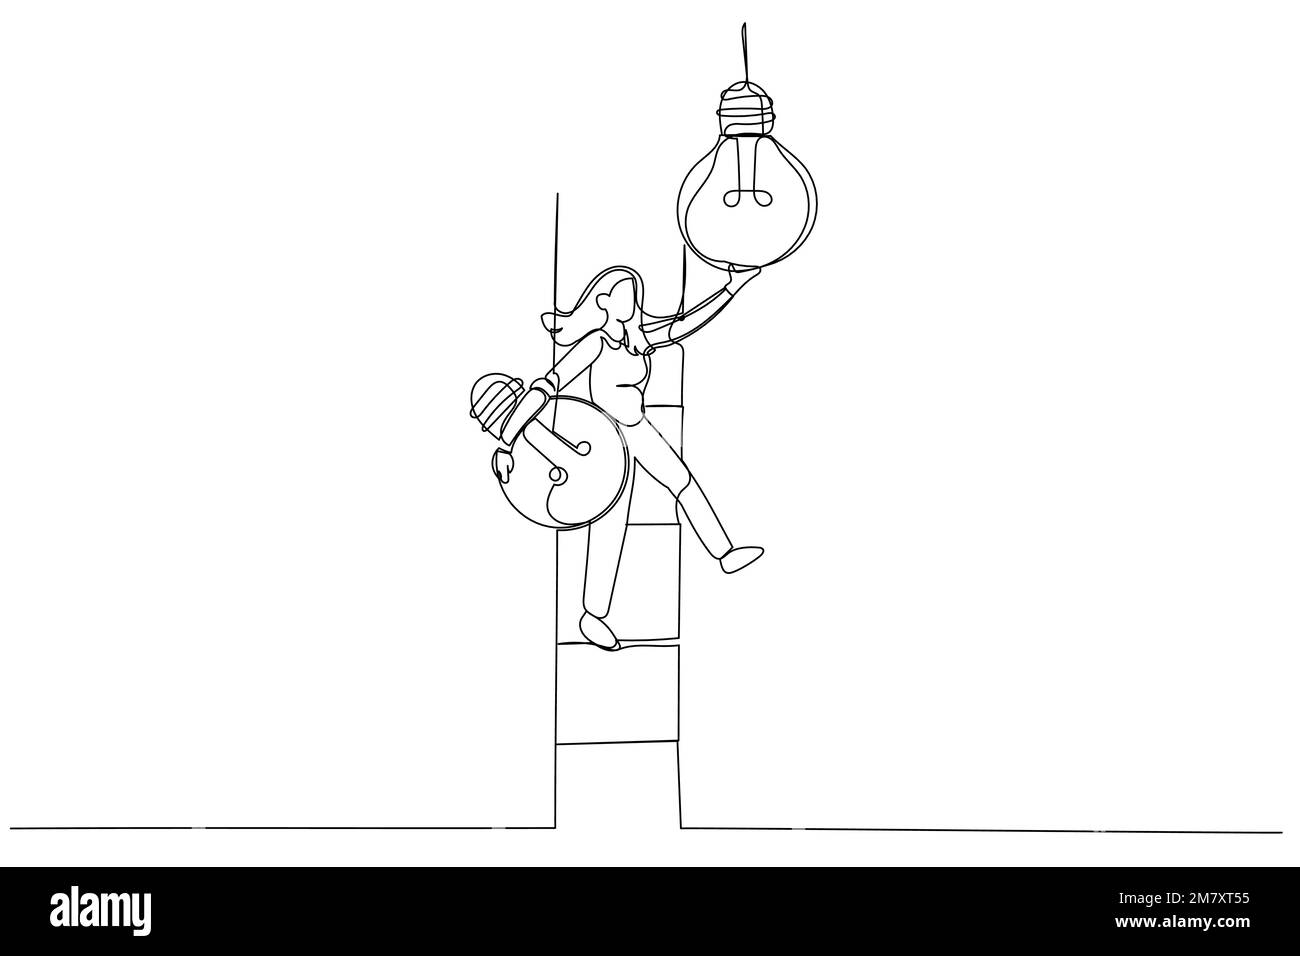 Drawing of businesswoman leader climb up ladder to change